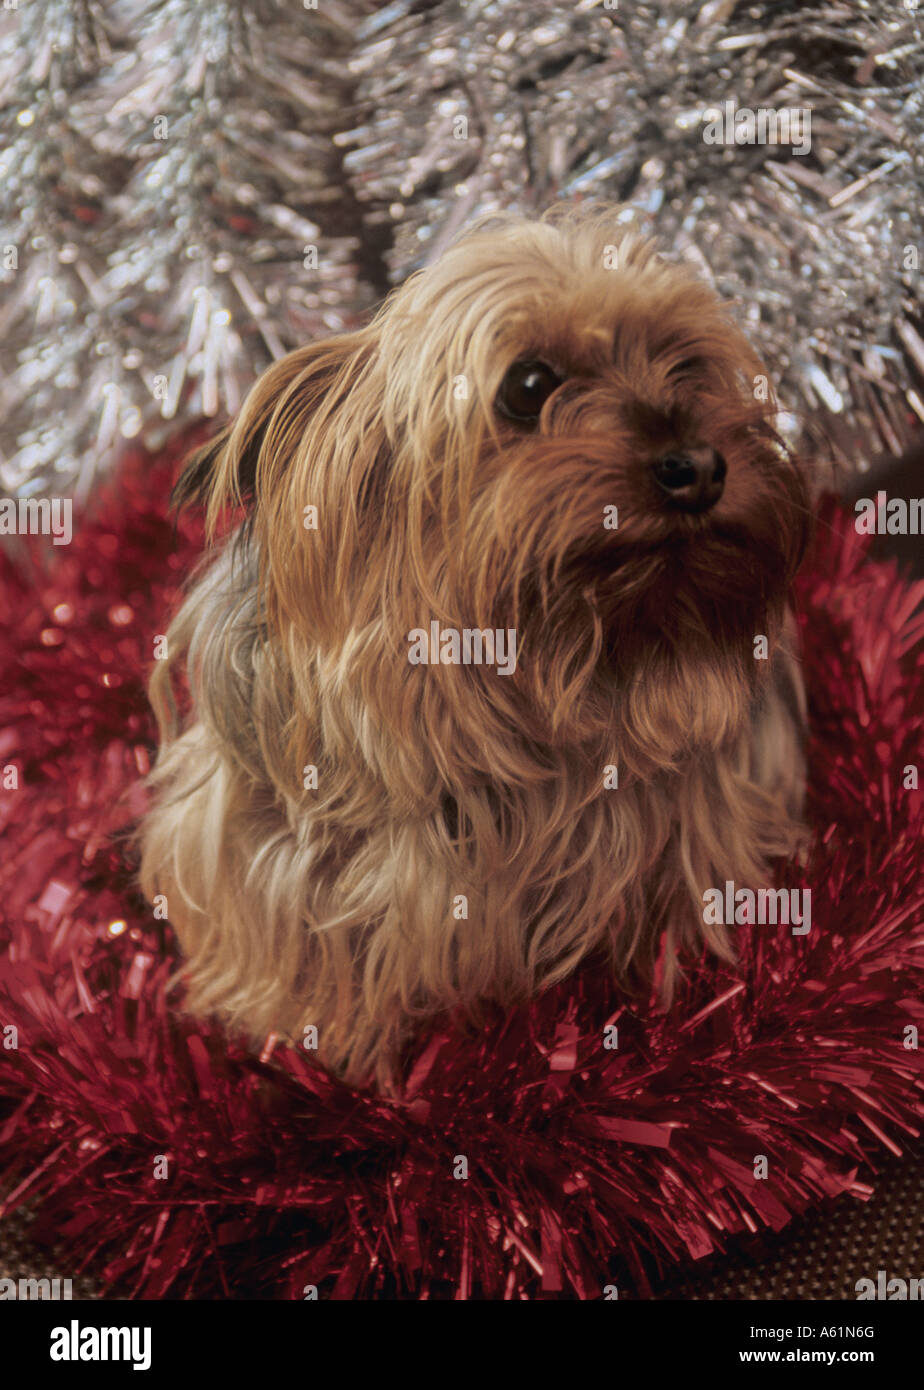 yorkshire terrier dog surrounded by lots of tinsel at Christmas time Stock Photo